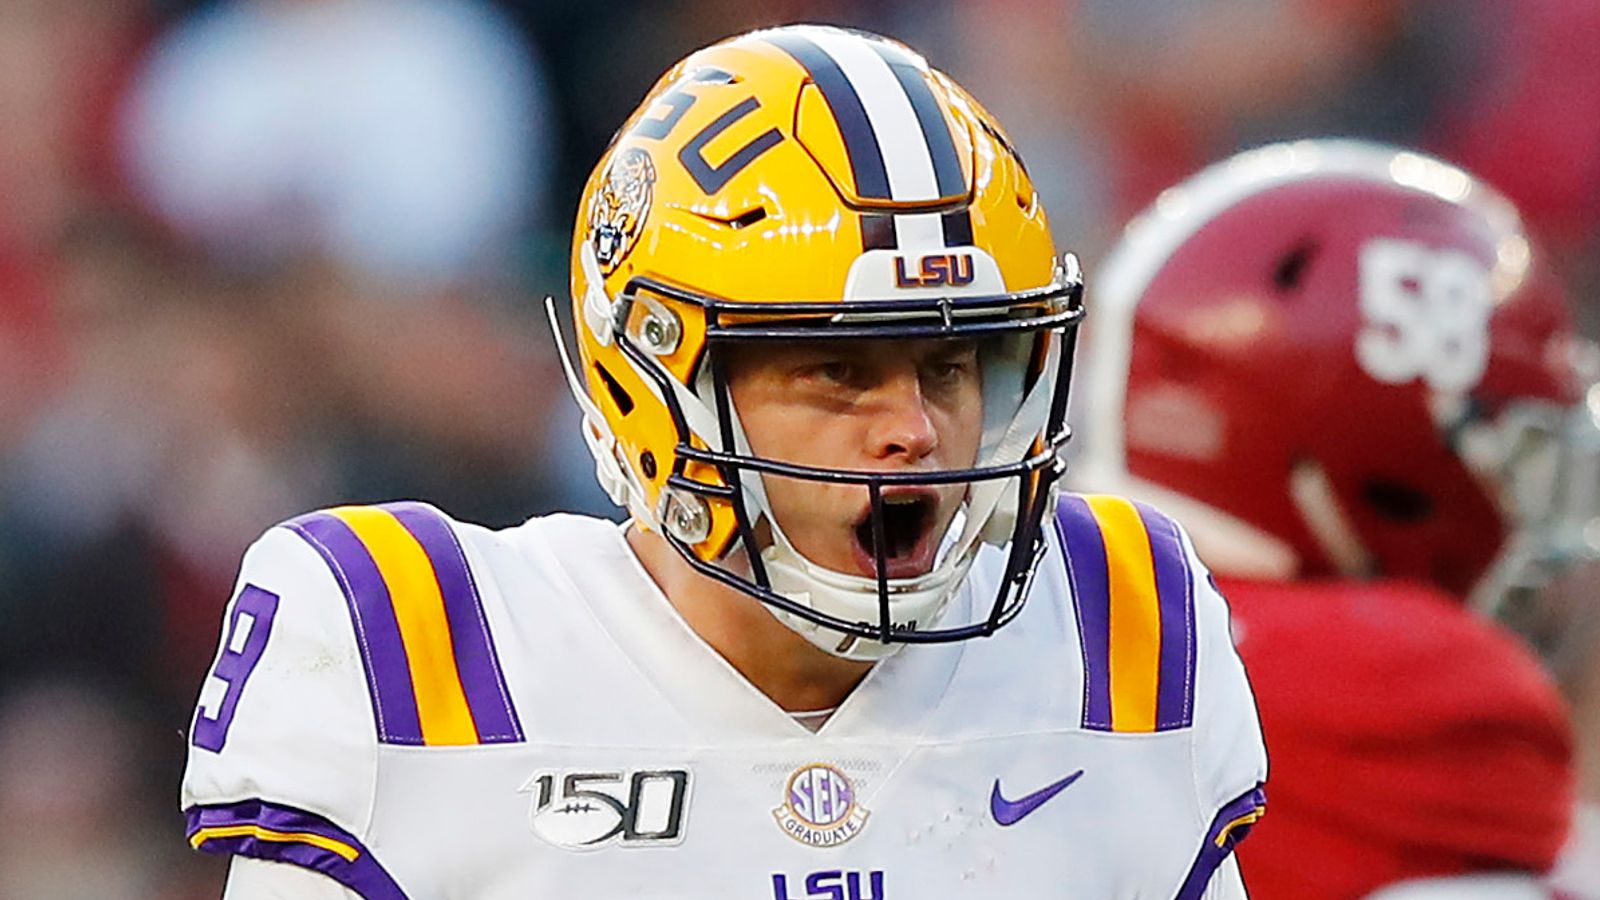 NFL Draft results: Why Joe Burrow was drafted by the Bengals - Cincy Jungle